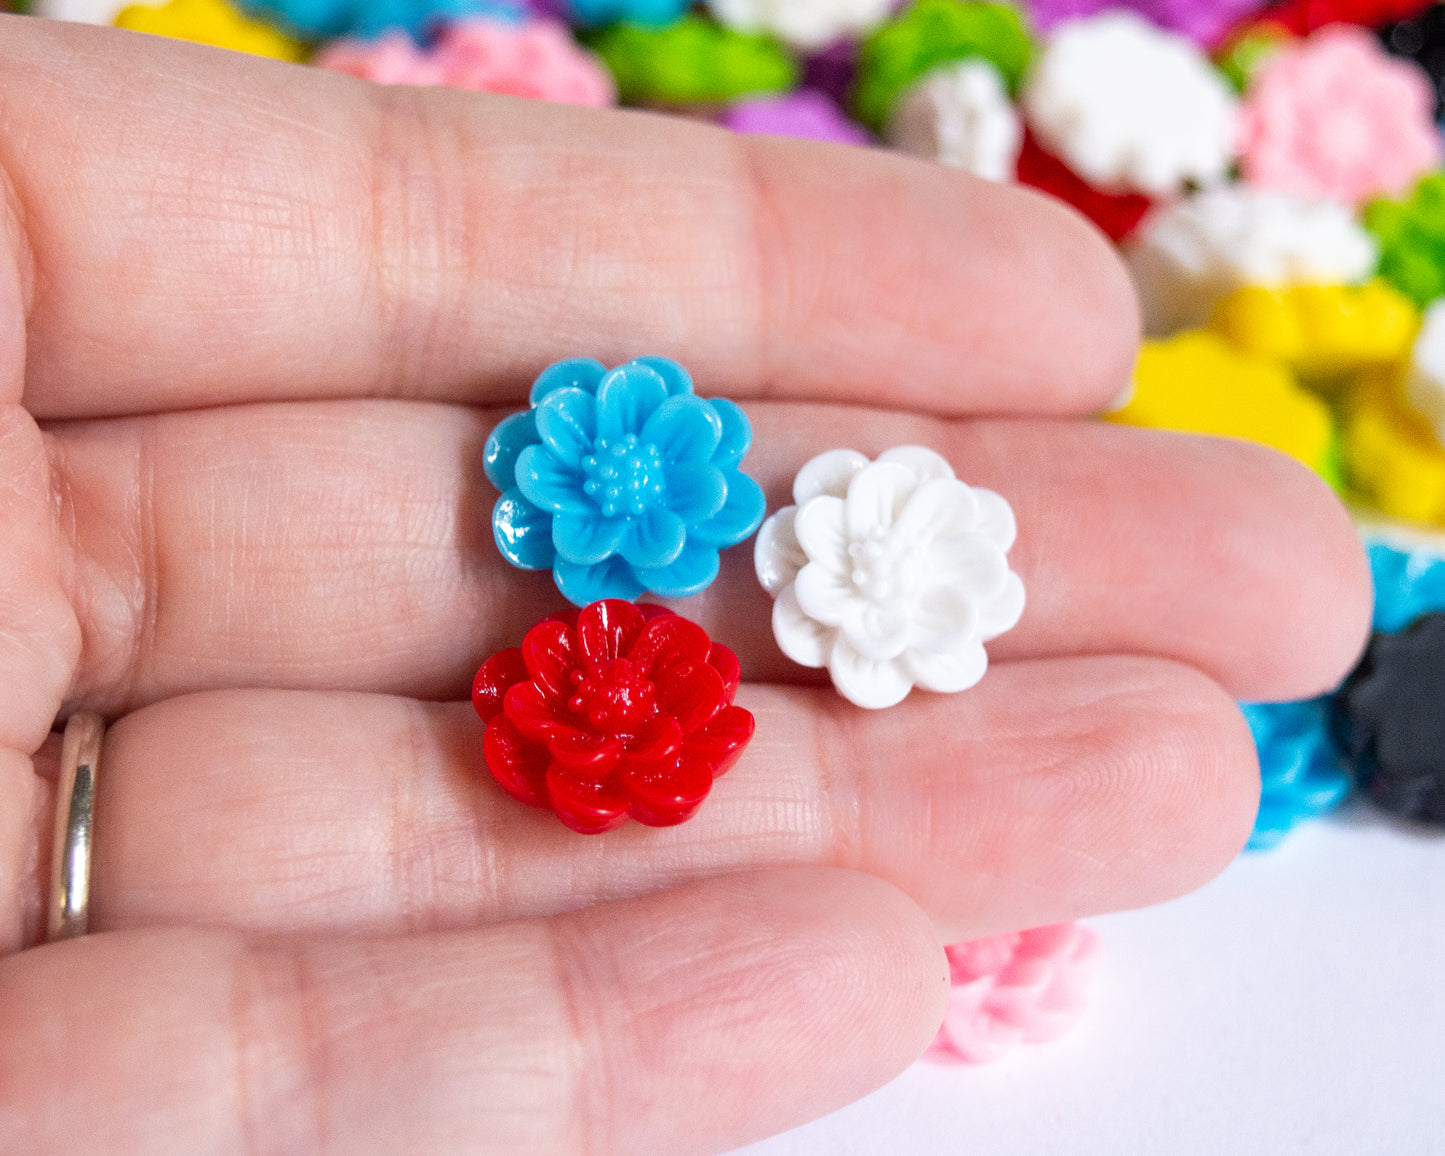 15.5mm Flower Cabochons in Colorful Resin, Bright Bold Color Mix, Chrysanthemum Dahlia Shape, Flatback Undrilled Cabs for DIY Jewelry Crafts